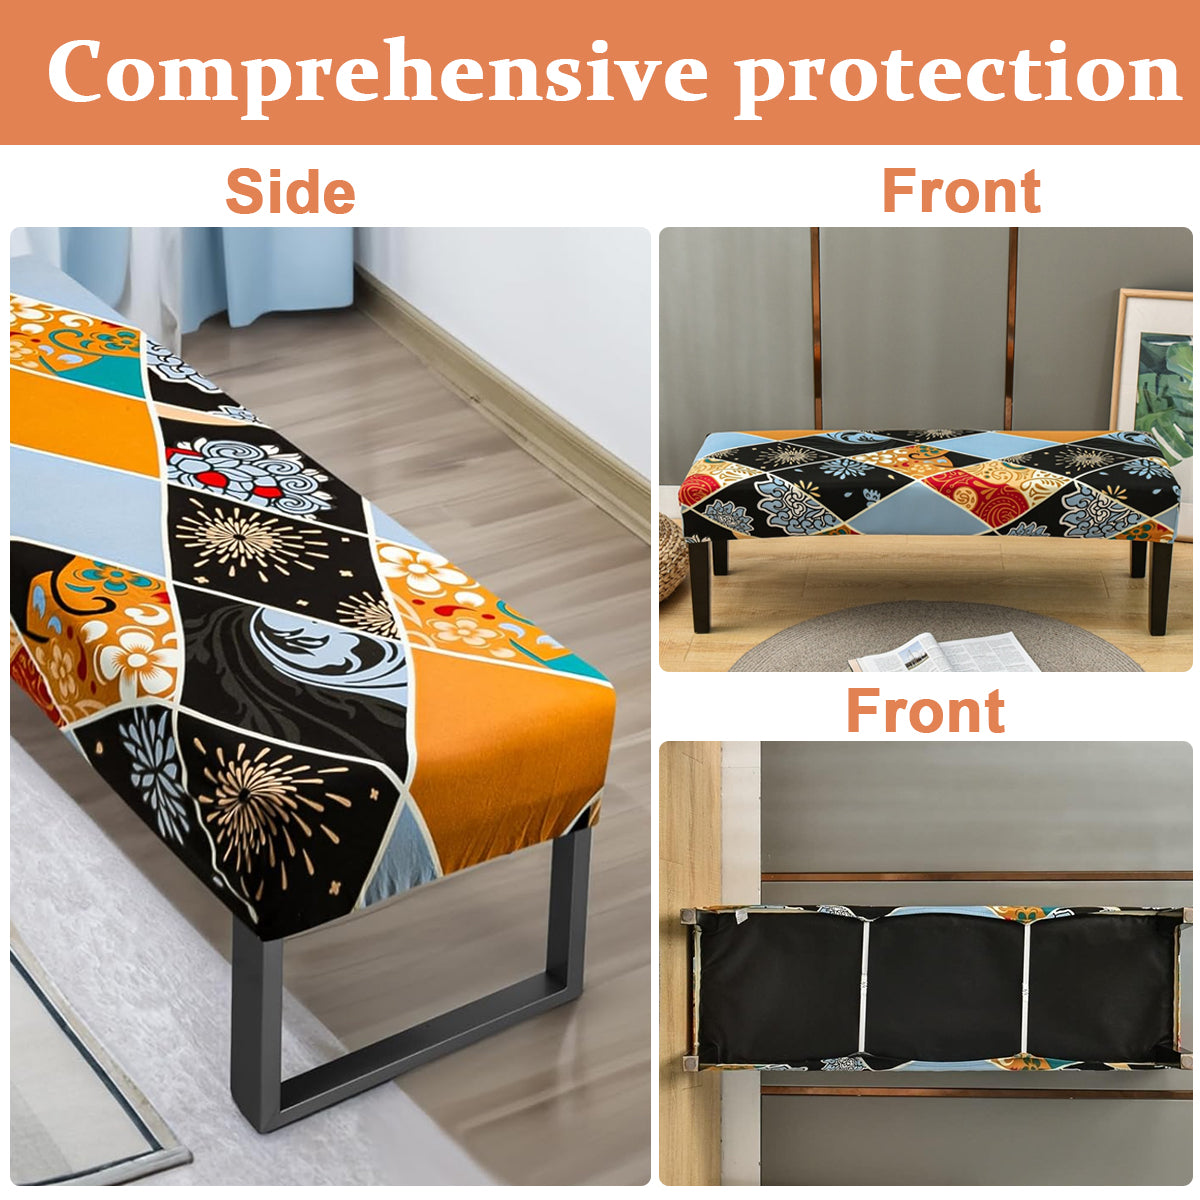 HASTHIP® Stretchy Bench Seat Cover Anti-scratch Dacron Cover for Living Room Bench Floral Print Bench Cover Leather Bench Seat Protector Cover for Piano Bench, Entryway Bench Anti-Dust Removable Bench